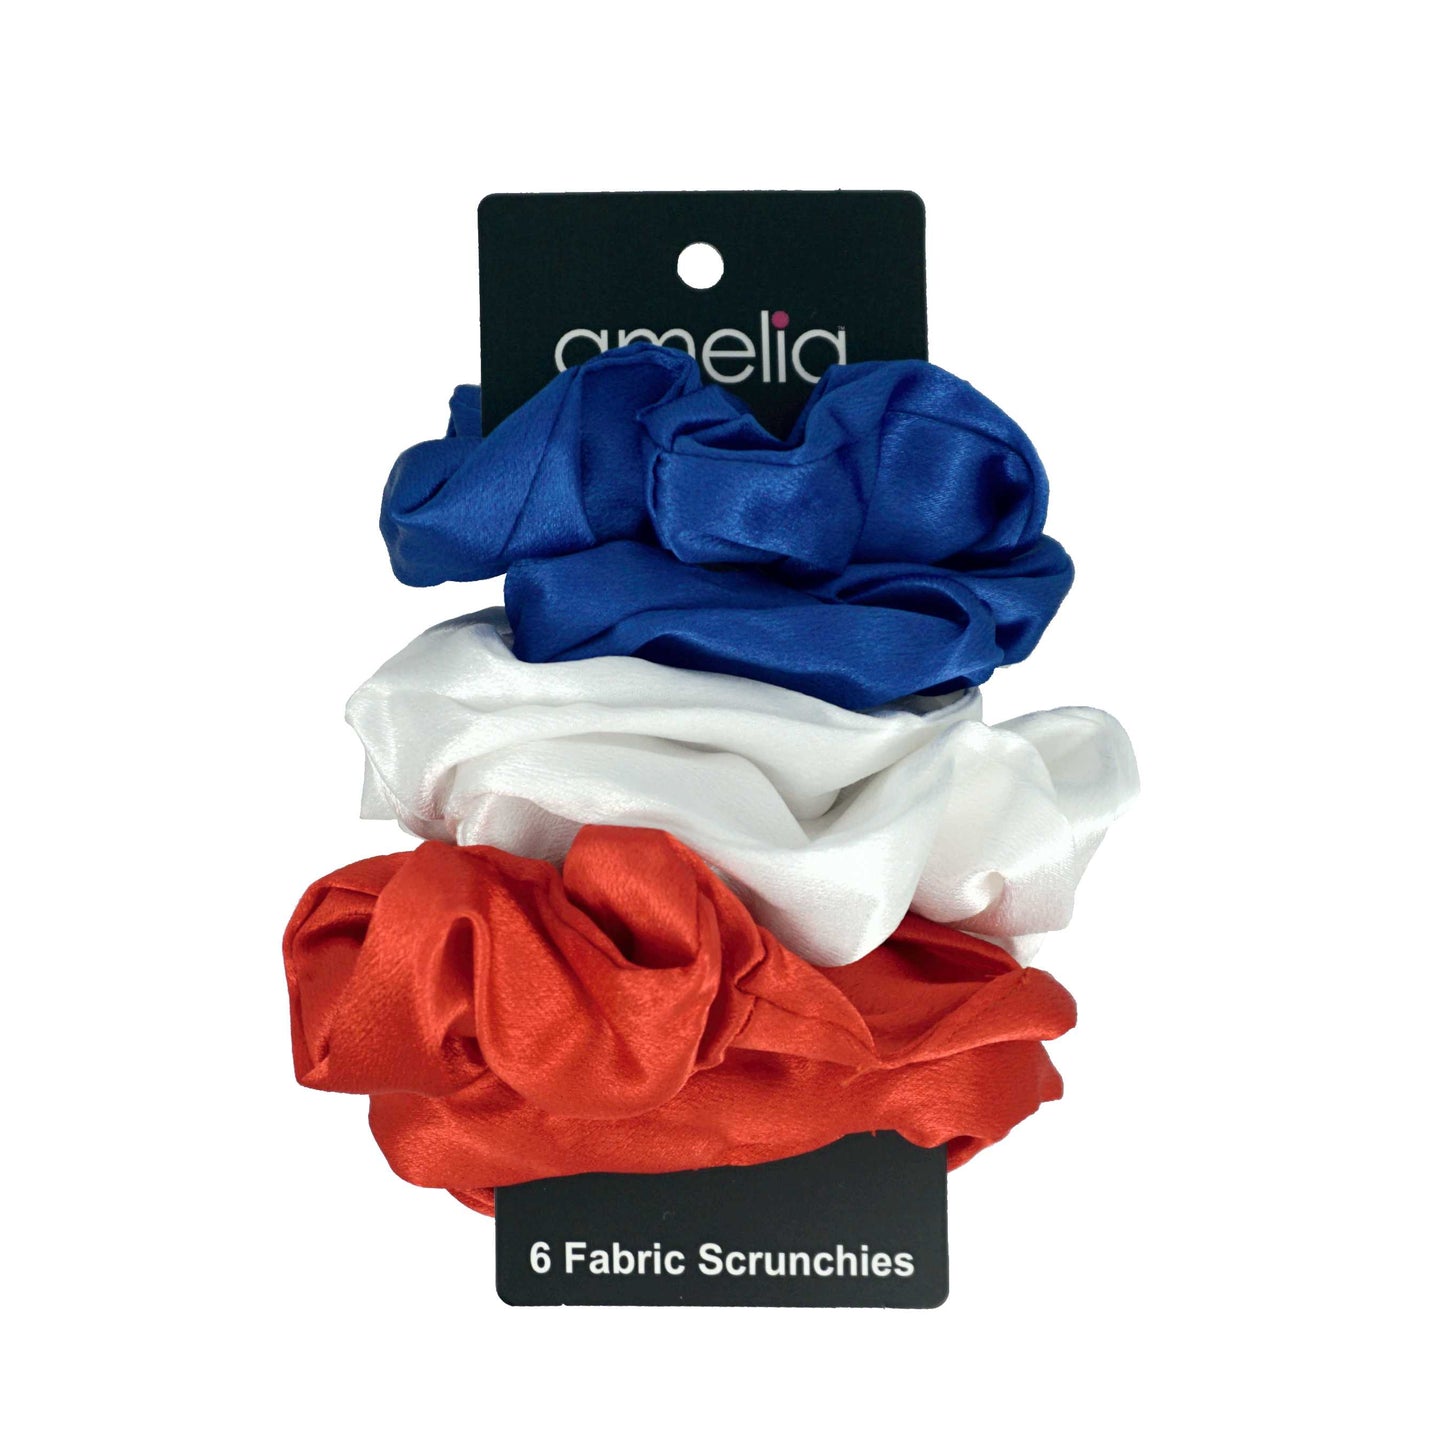 Amelia Beauty Products, Red, White and Blue Scrunchies, 4.5in Diameter, Gentle on Hair, Strong Hold, No Snag, No Dents or Creases. 6 Pack